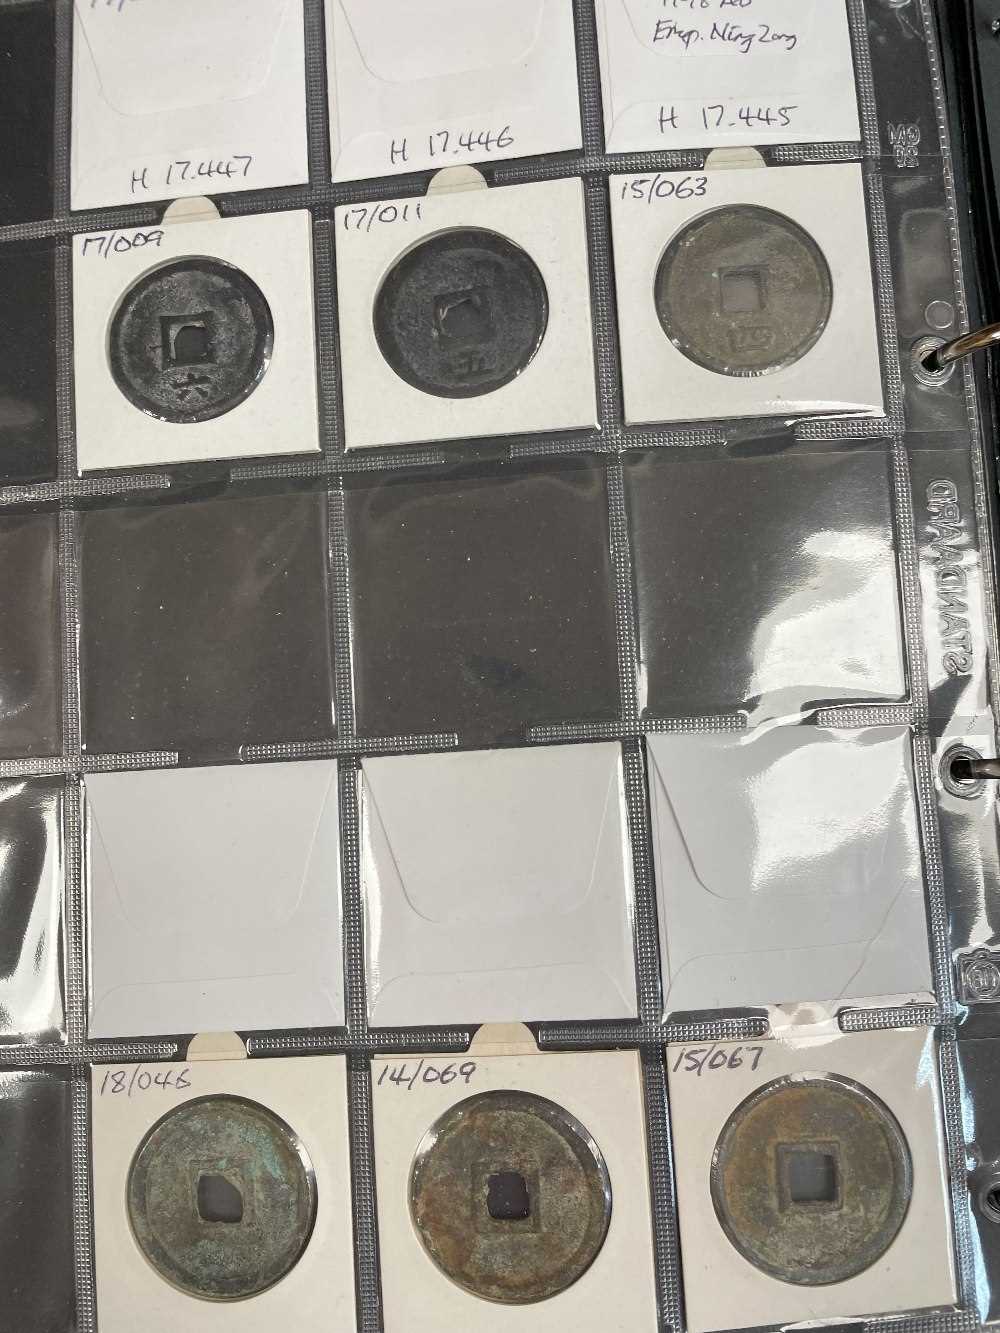 TWO COIN ALBUMS containing various collectable coins including Japanese Tenpō Tsūhō, Chinese cash - Image 6 of 16